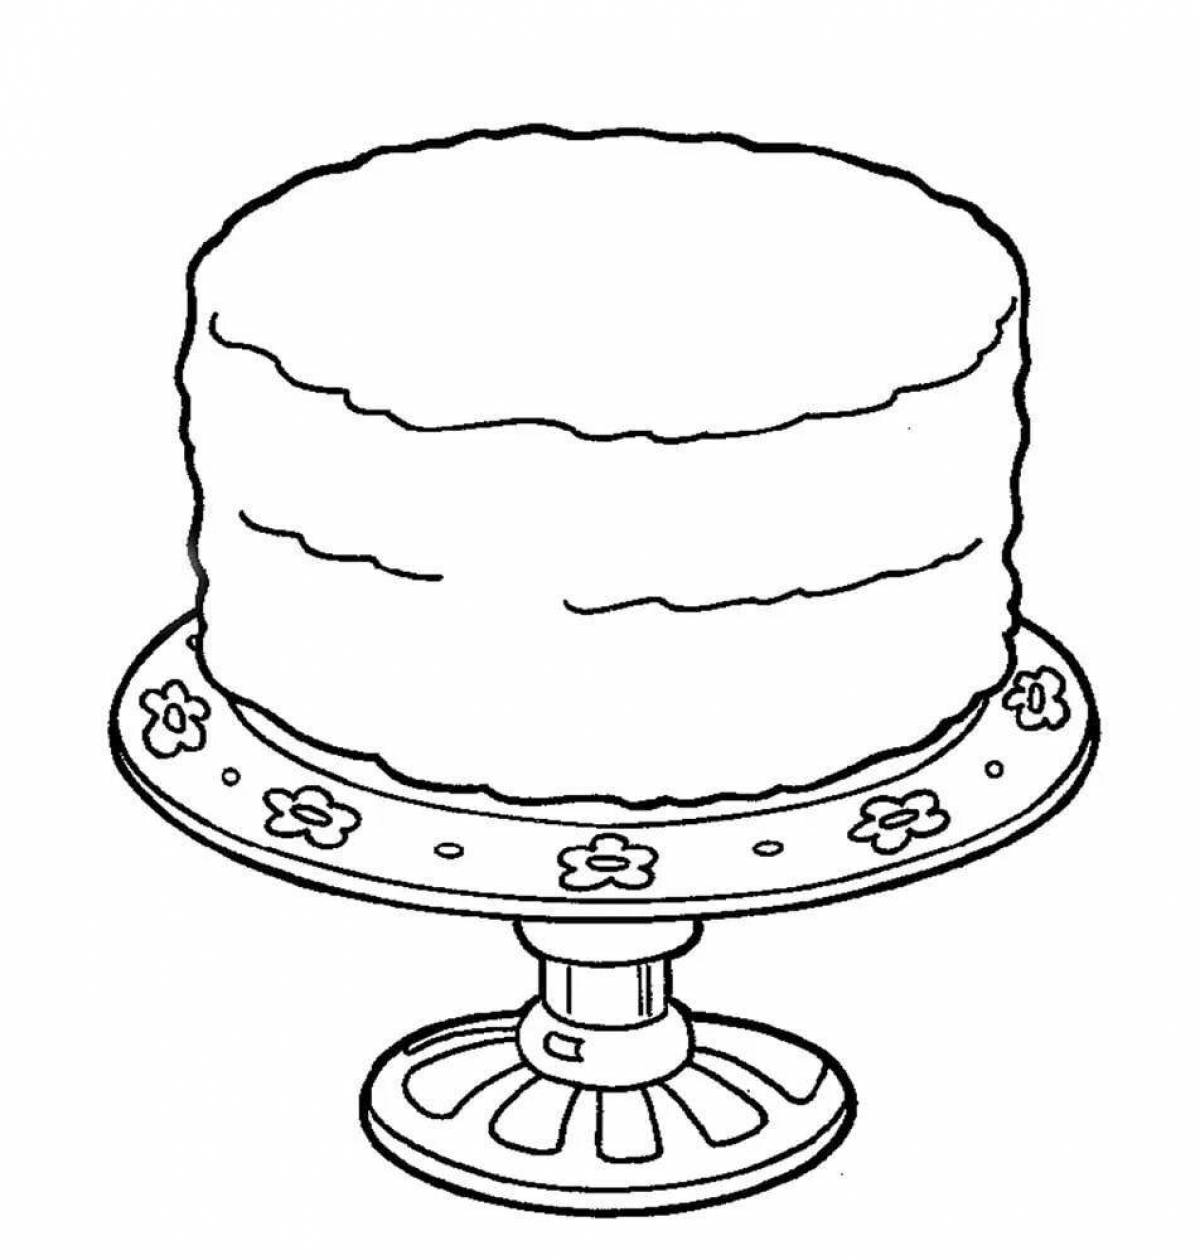 Nutty chocolate cake coloring page